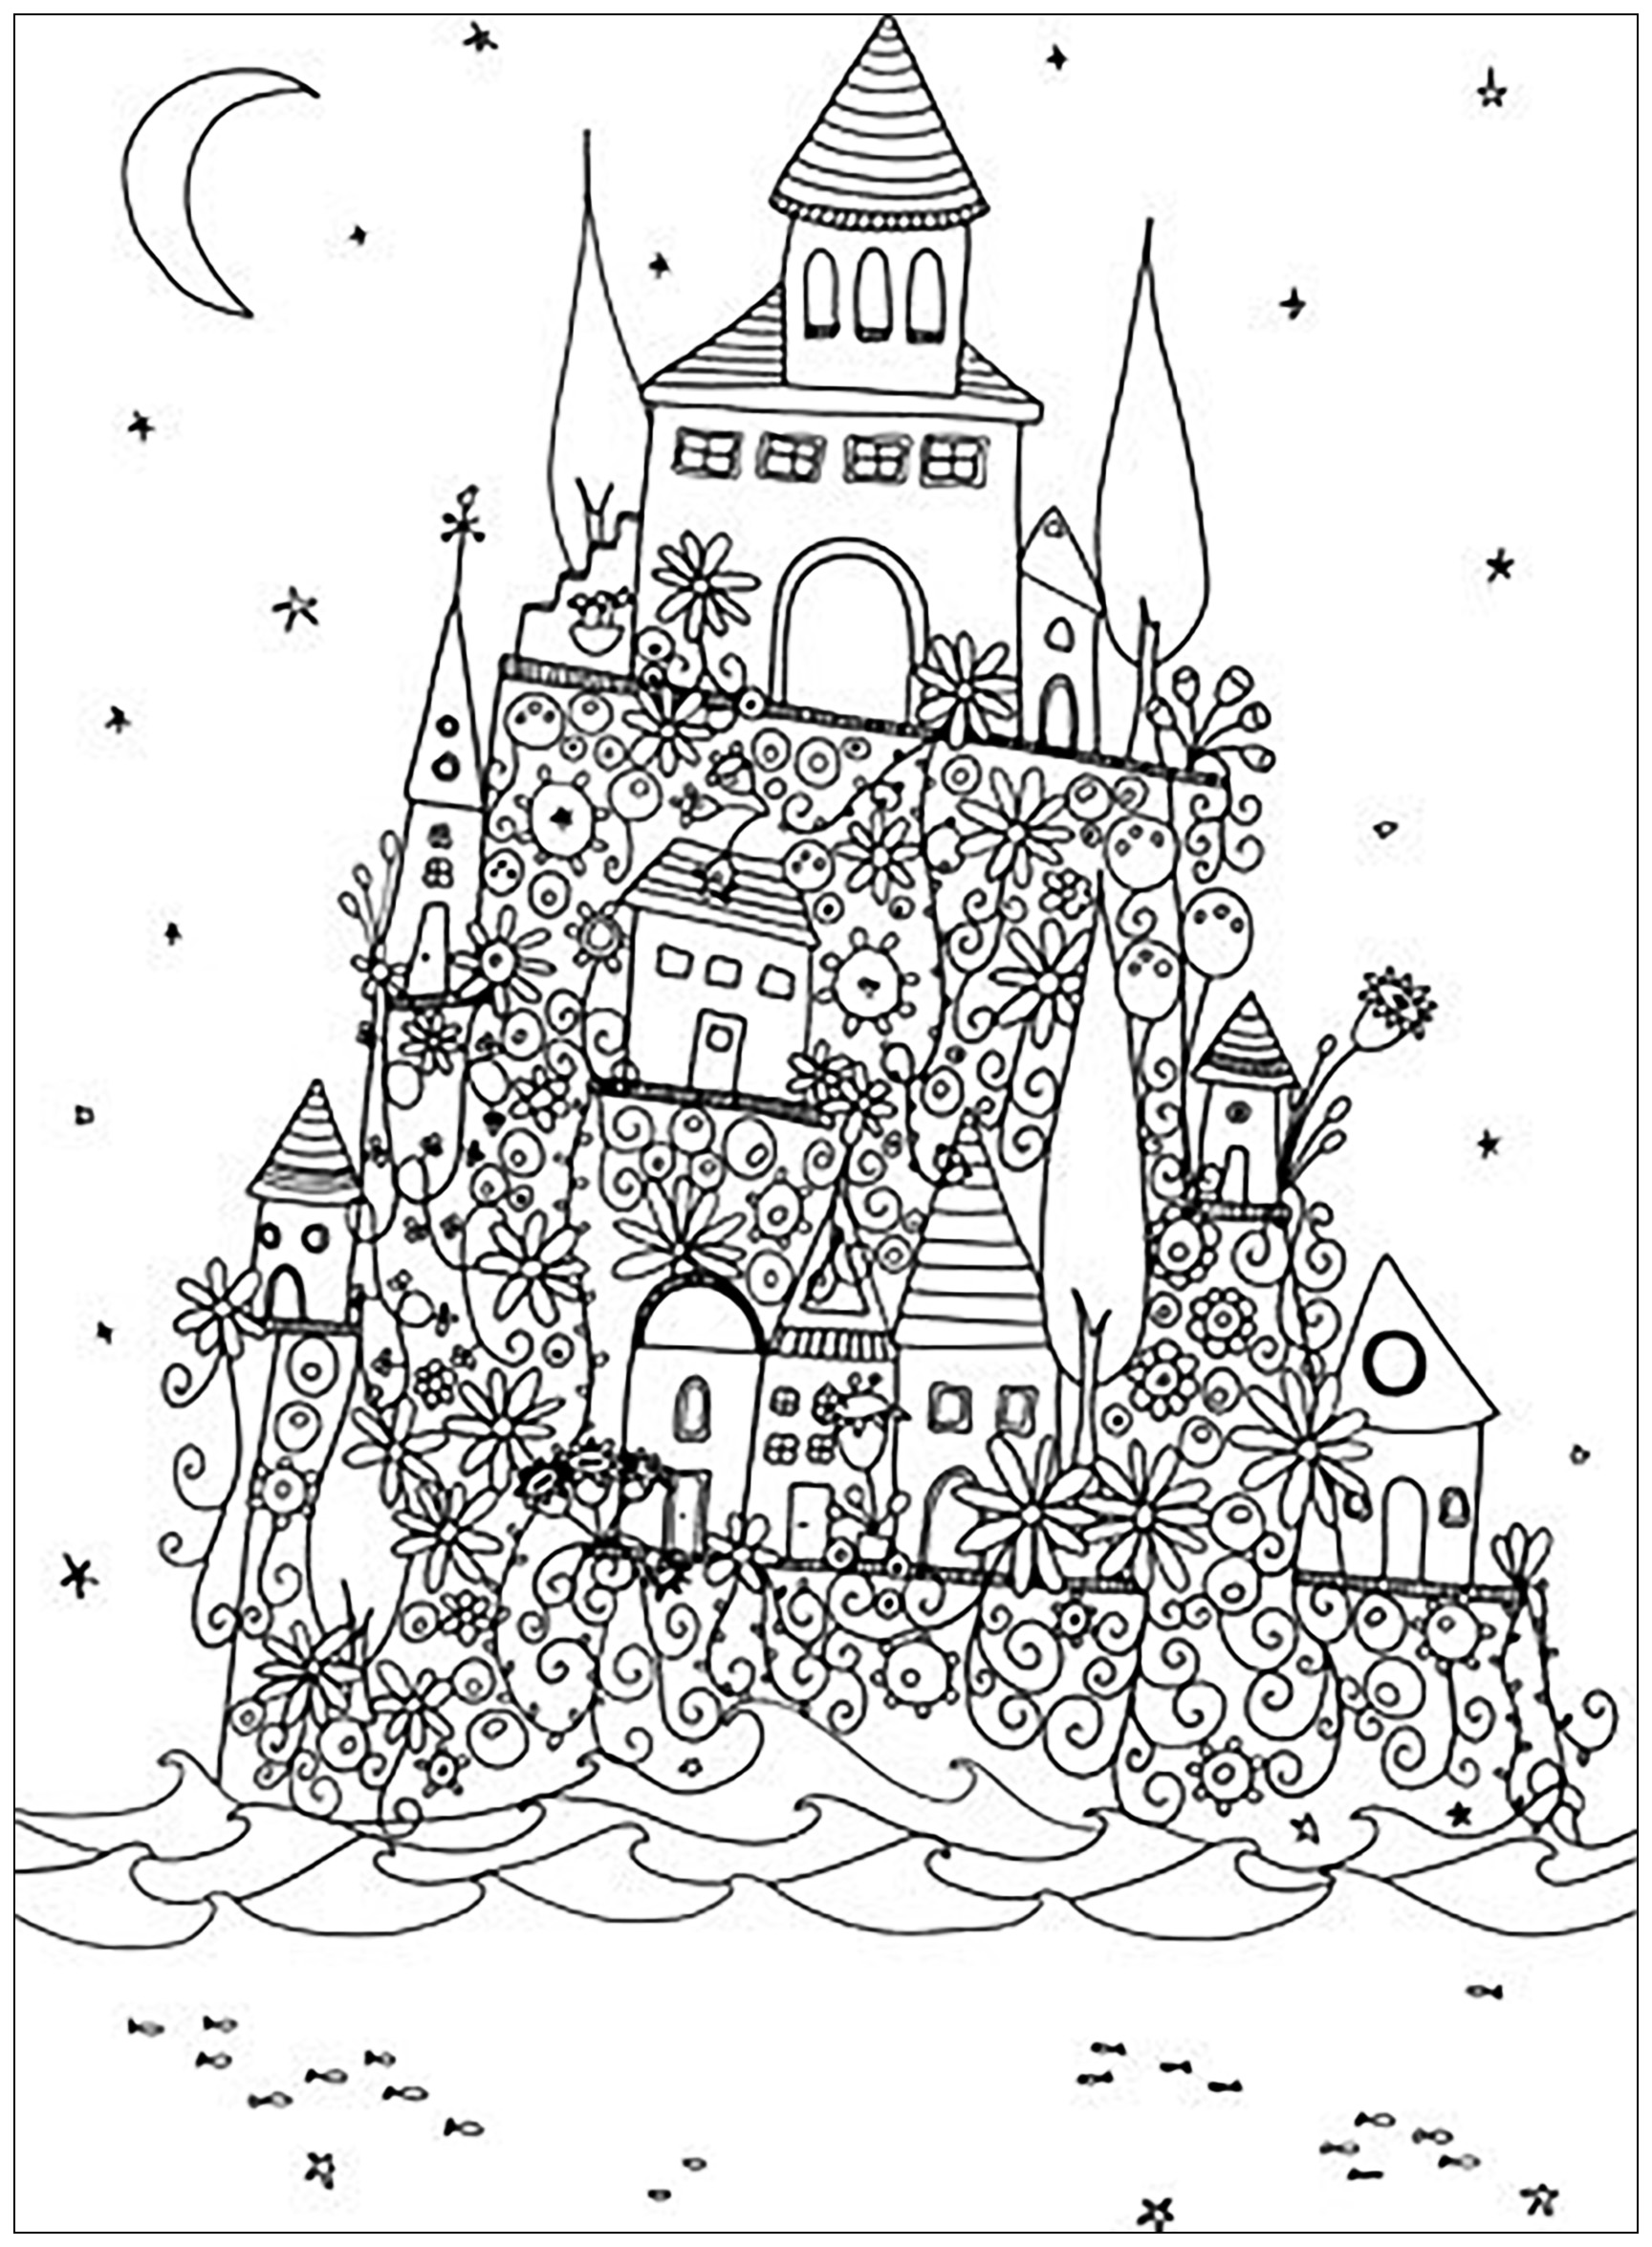 30+ popular stress relief coloring pages for adults Woman headscarf